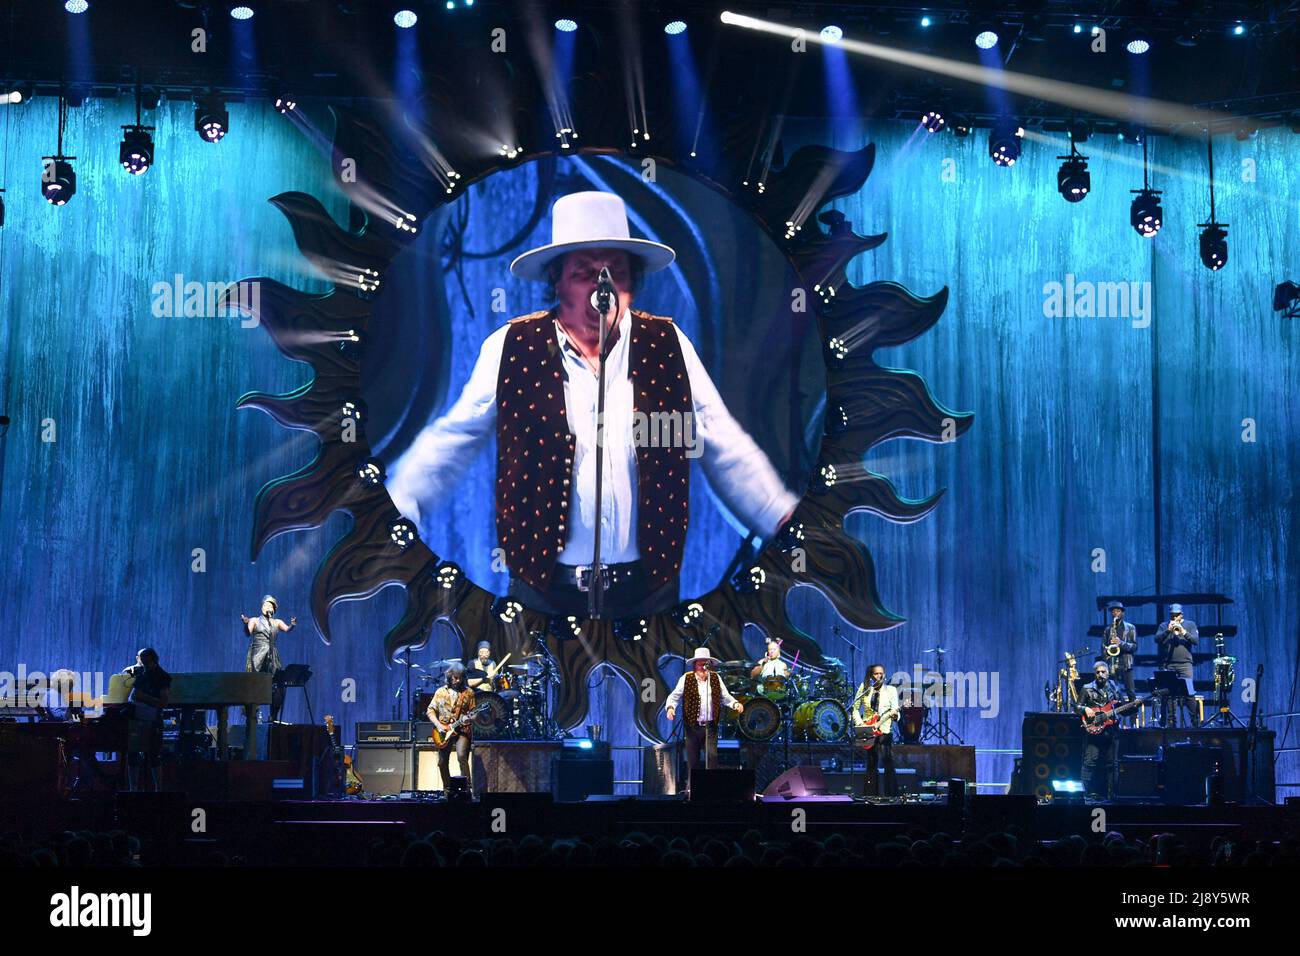 Zucchero Fornaciari performs at the AccorHotels Arena in Paris, France on May 18, 2022. Photo by Christophe Meng/ABACAPRESS.COM Stock Photo